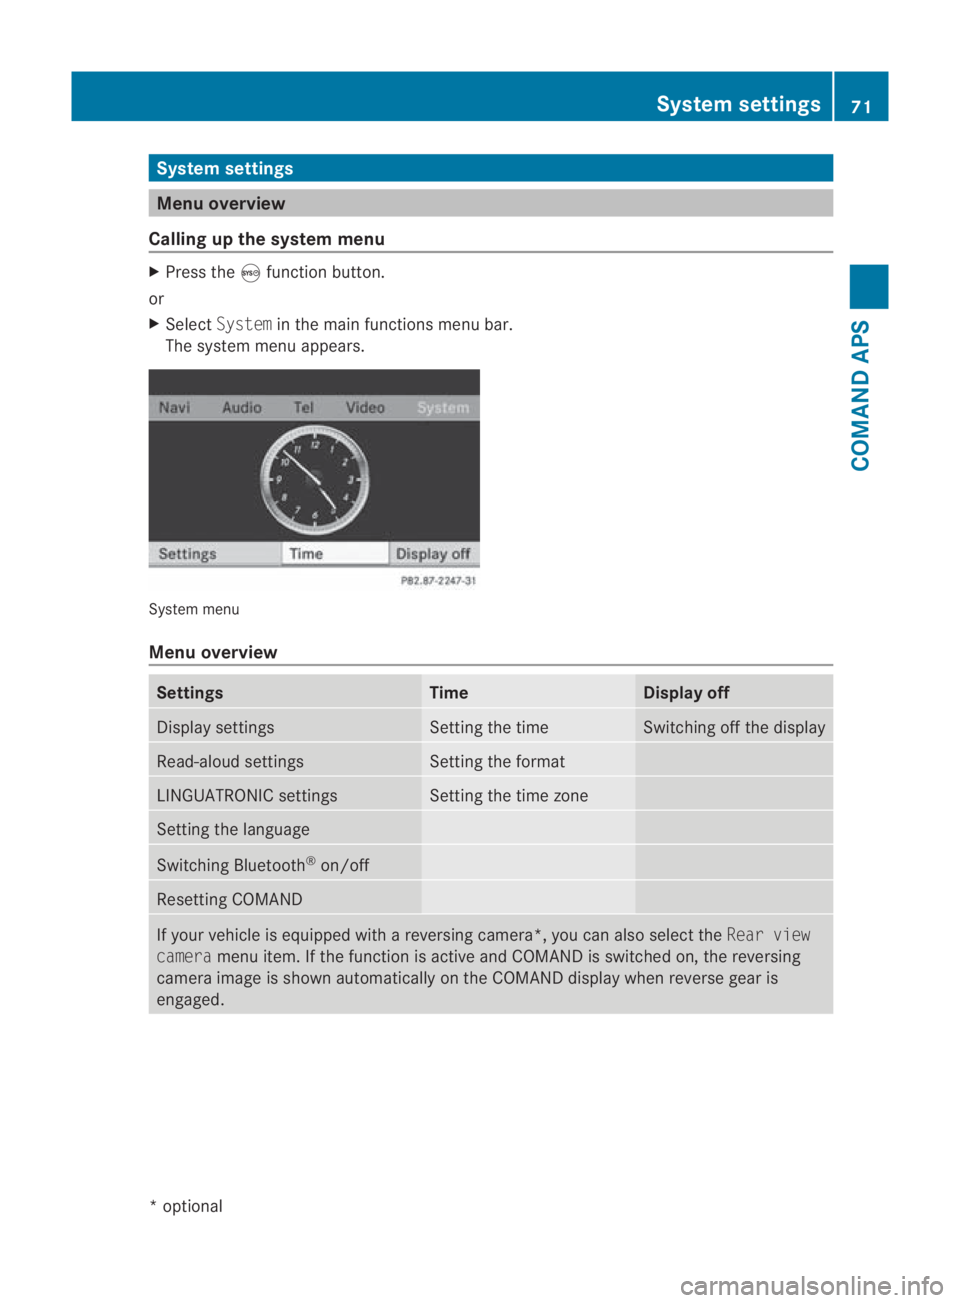 MERCEDES-BENZ SLS COUPE 2010  Owners Manual System settings
Menu overview
Calling up the system menu X
Press the 0023function button.
or
X Select System in the main functions menu bar.
The system menu appears. System menu
Menu overview
Settings